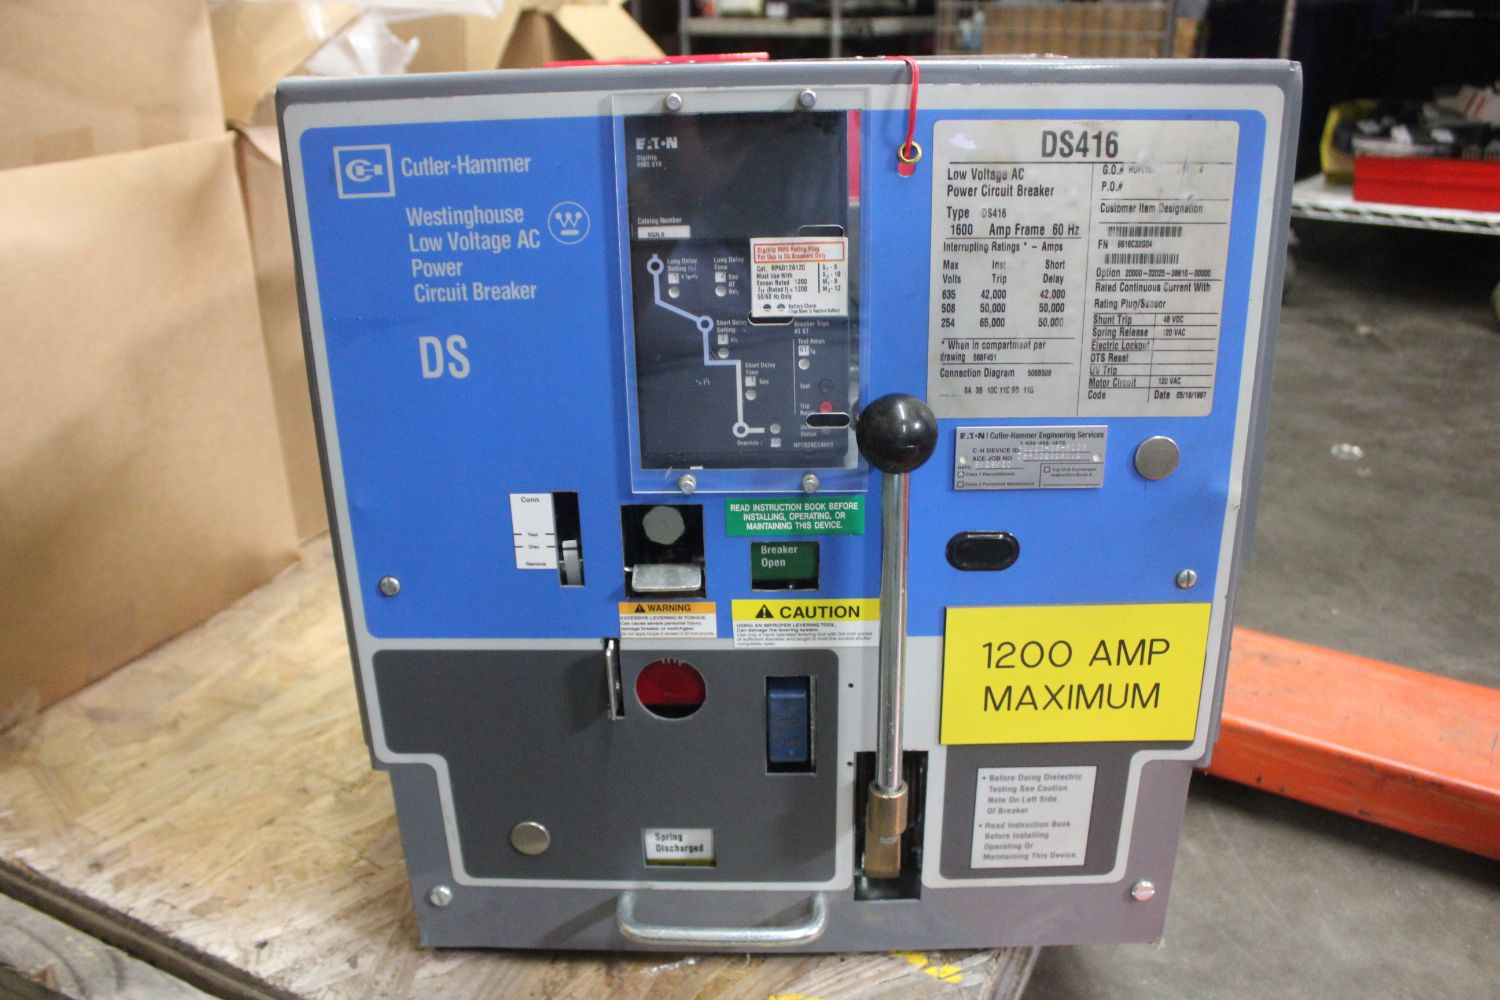 Day 2 Monthly New & Used Industrial MRO - Automation Parts, PLC's, Motors, Sensors, Breakers, Controls & More -**Shipping Available**